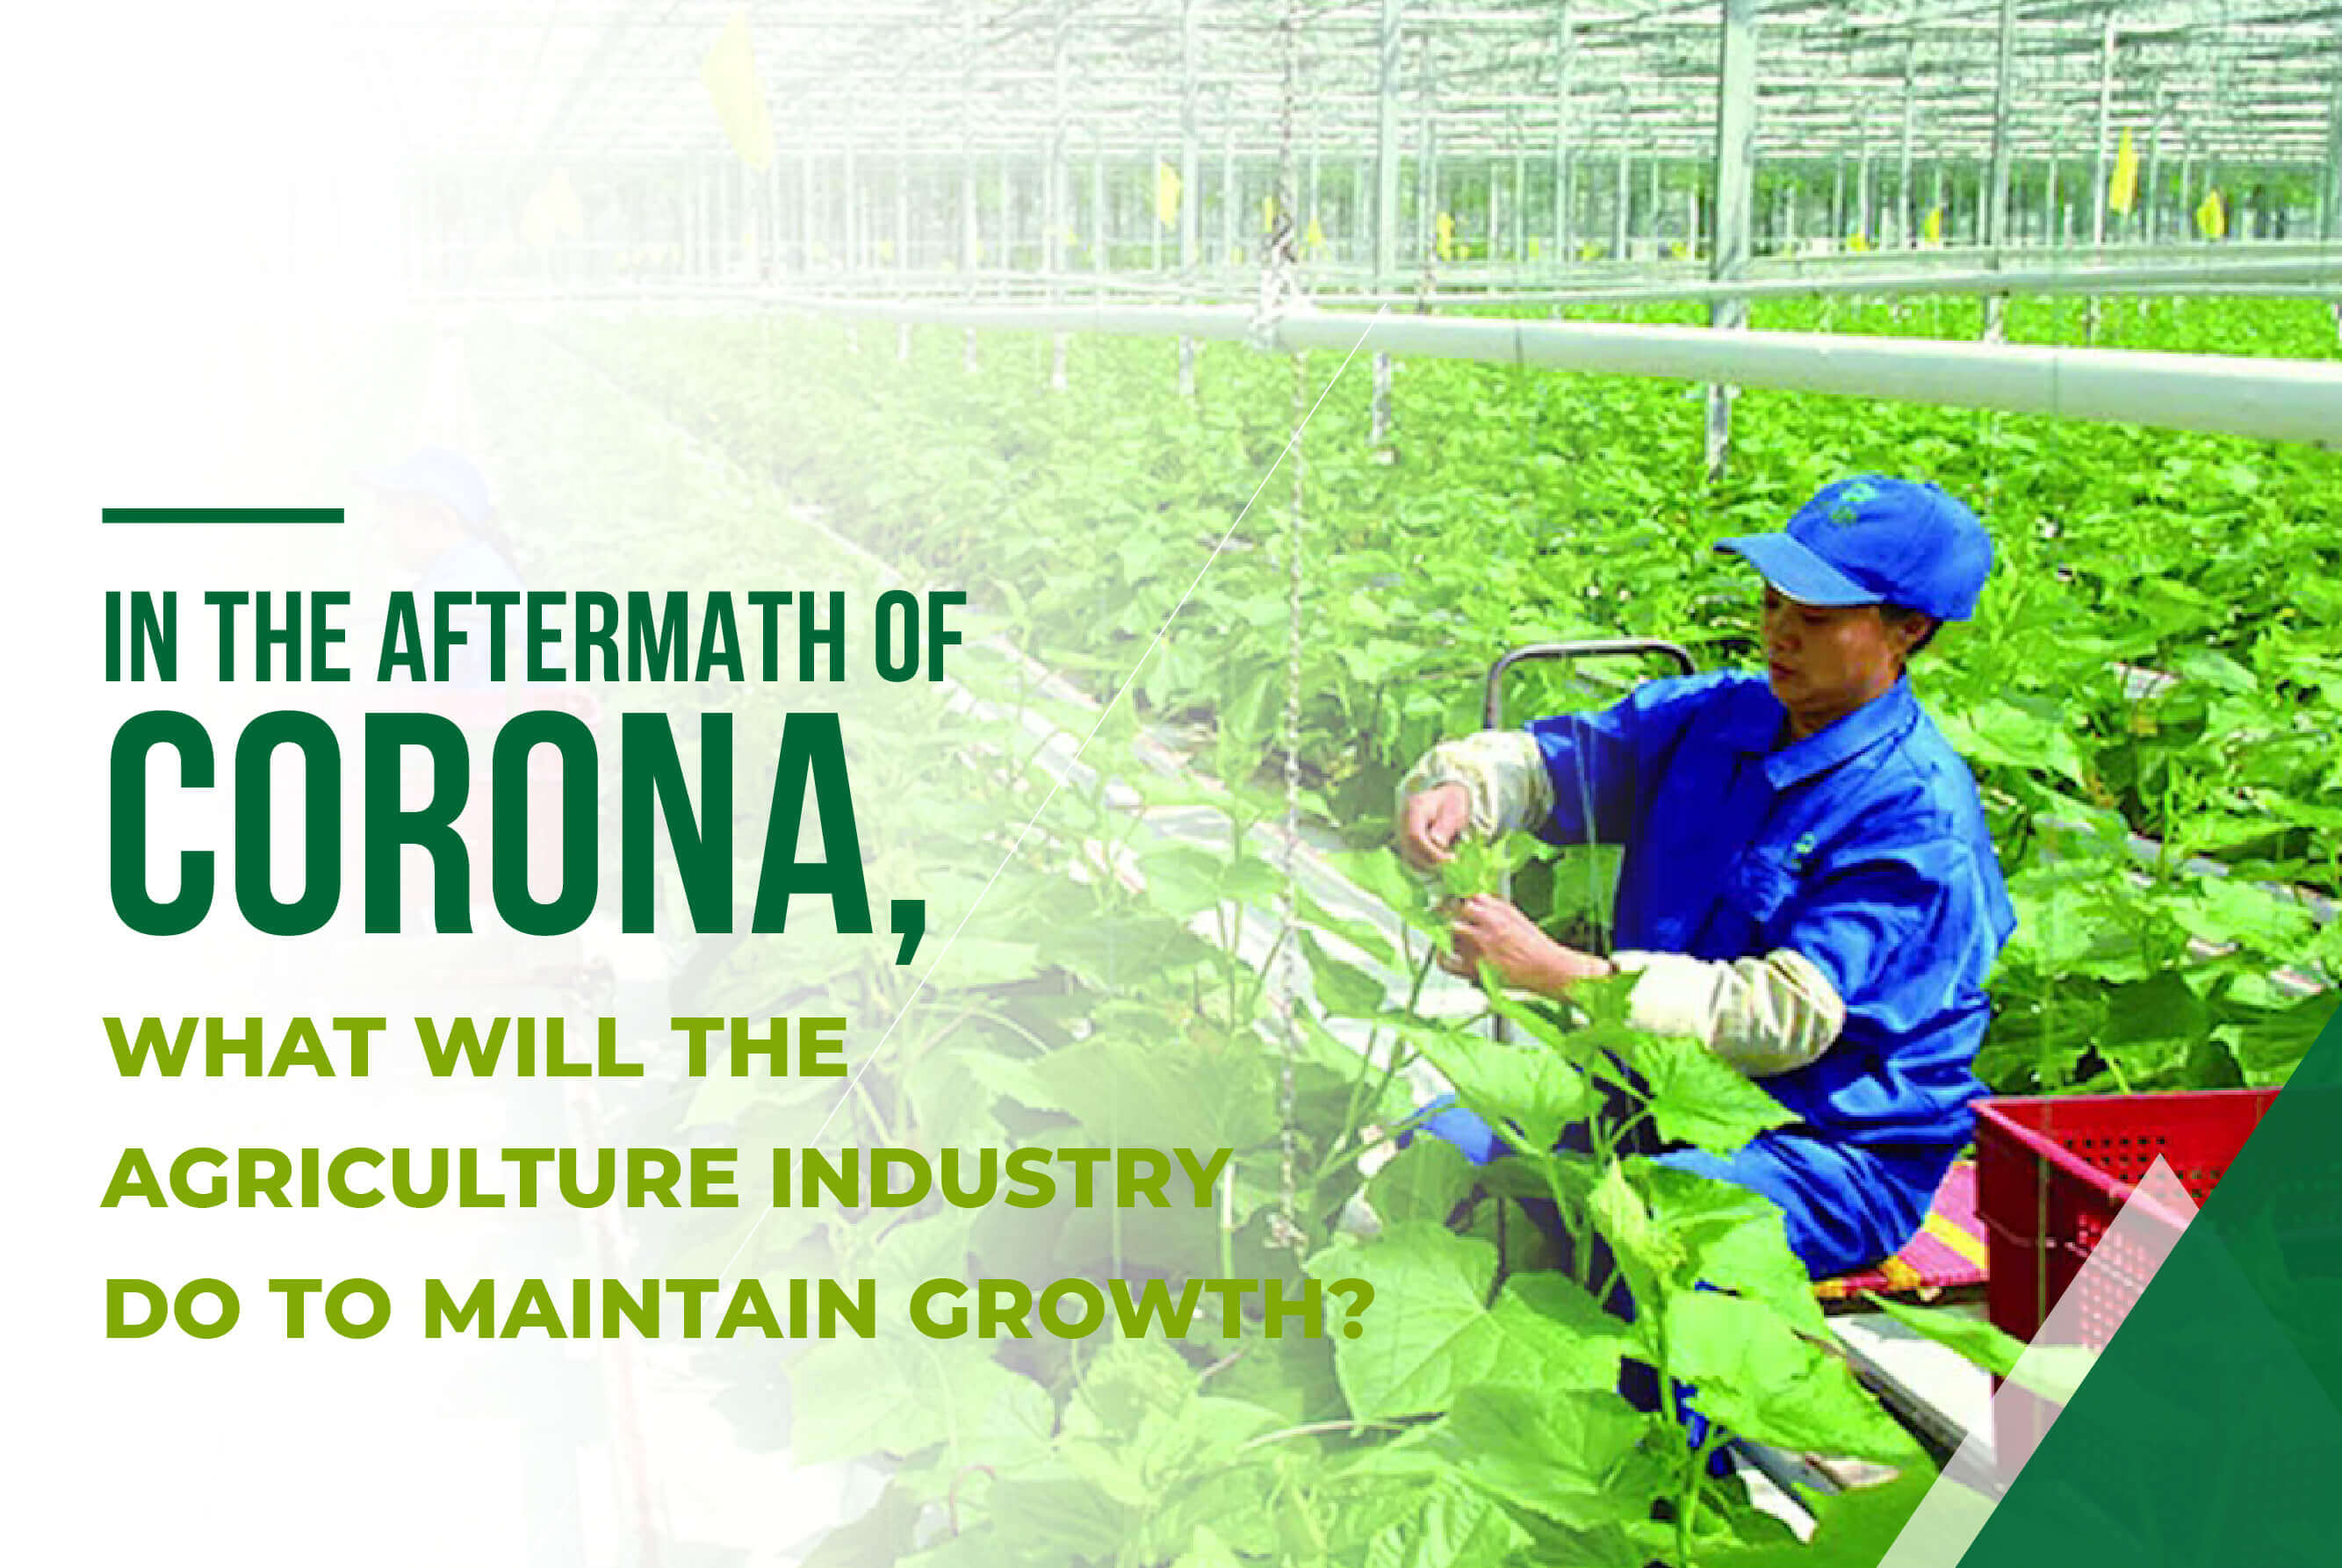 IN THE AFTERMATH OF CORONA, WHAT WILL THE AGRICULTURE INDUSTRY DO TO MAINTAIN GROWTH ?